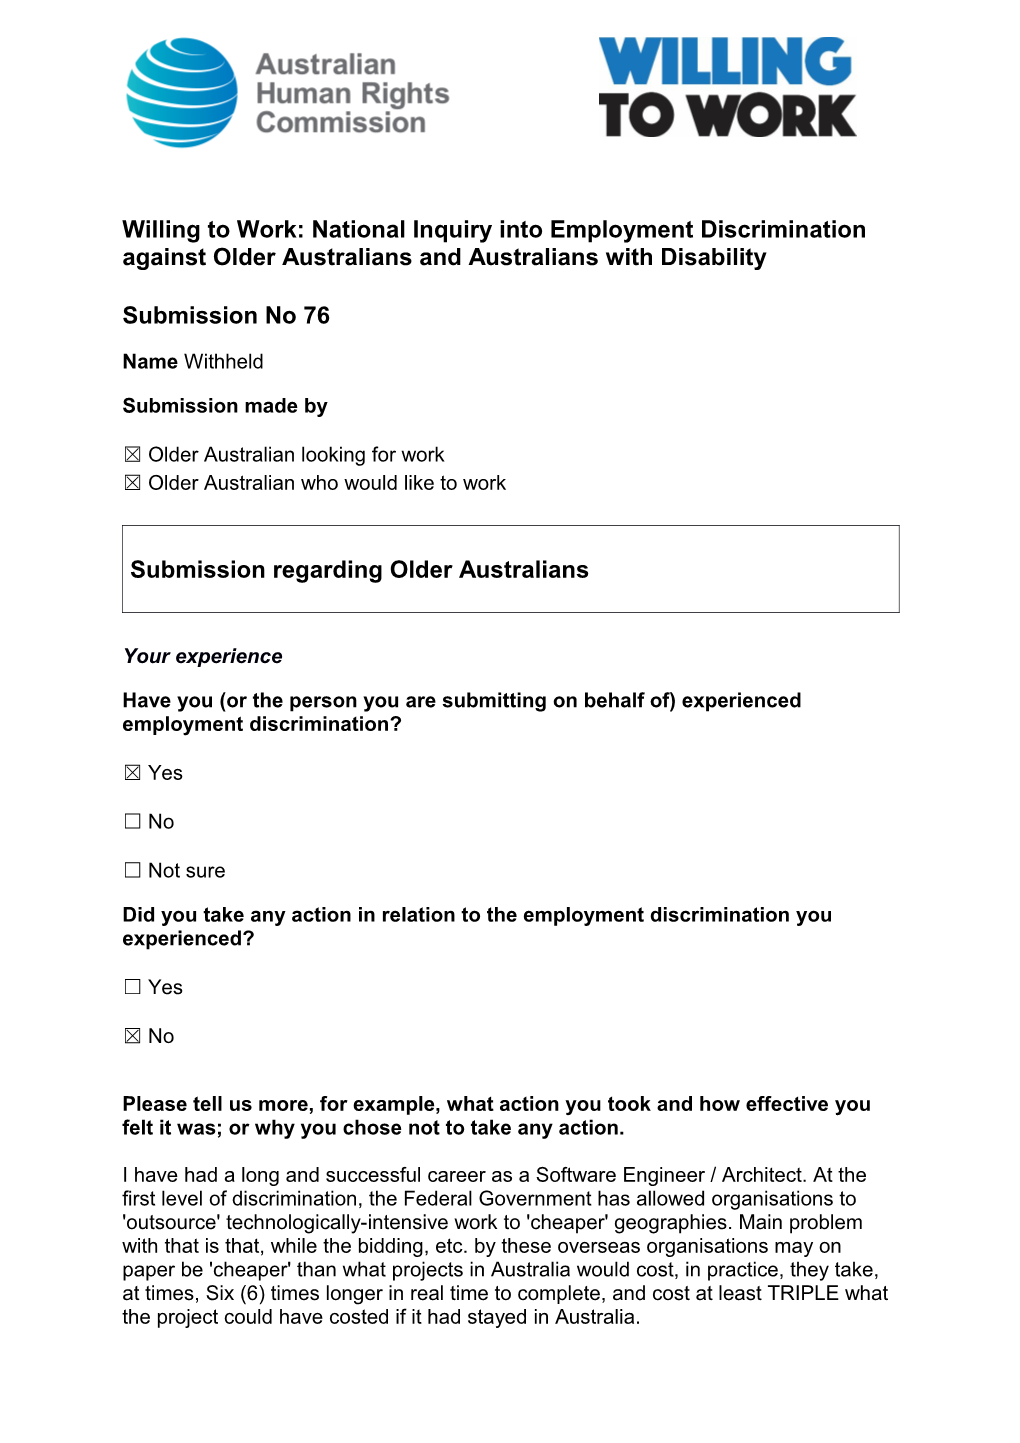 Willing to Work: National Inquiry Into Employment Discrimination Against Older Australians s2